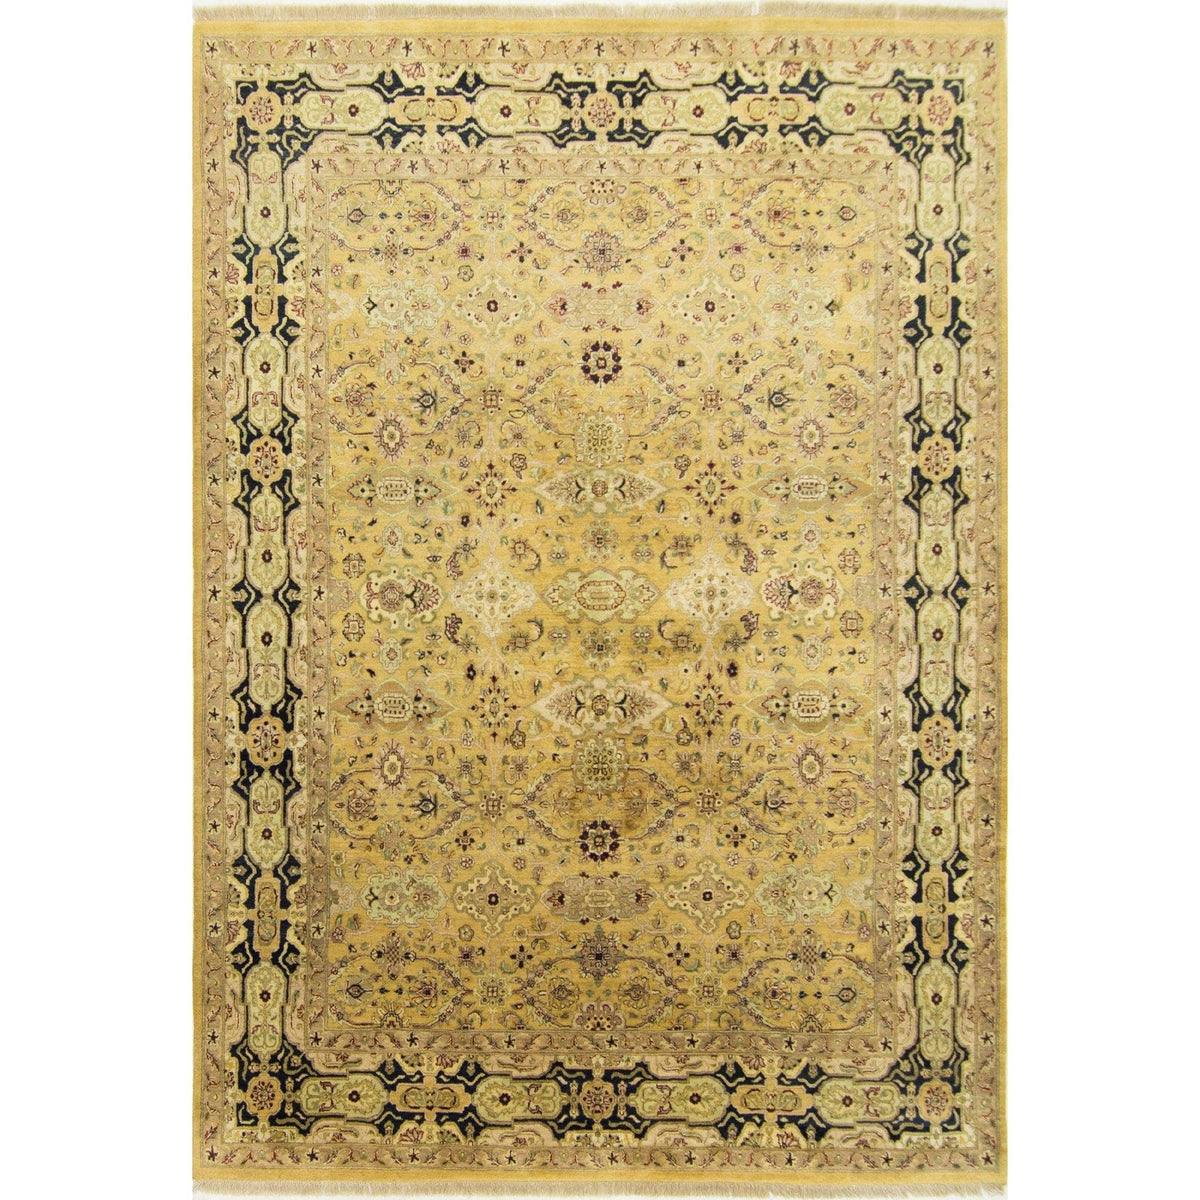 Fine Hand-knotted Traditional Wool Rug 275cm x 372cm